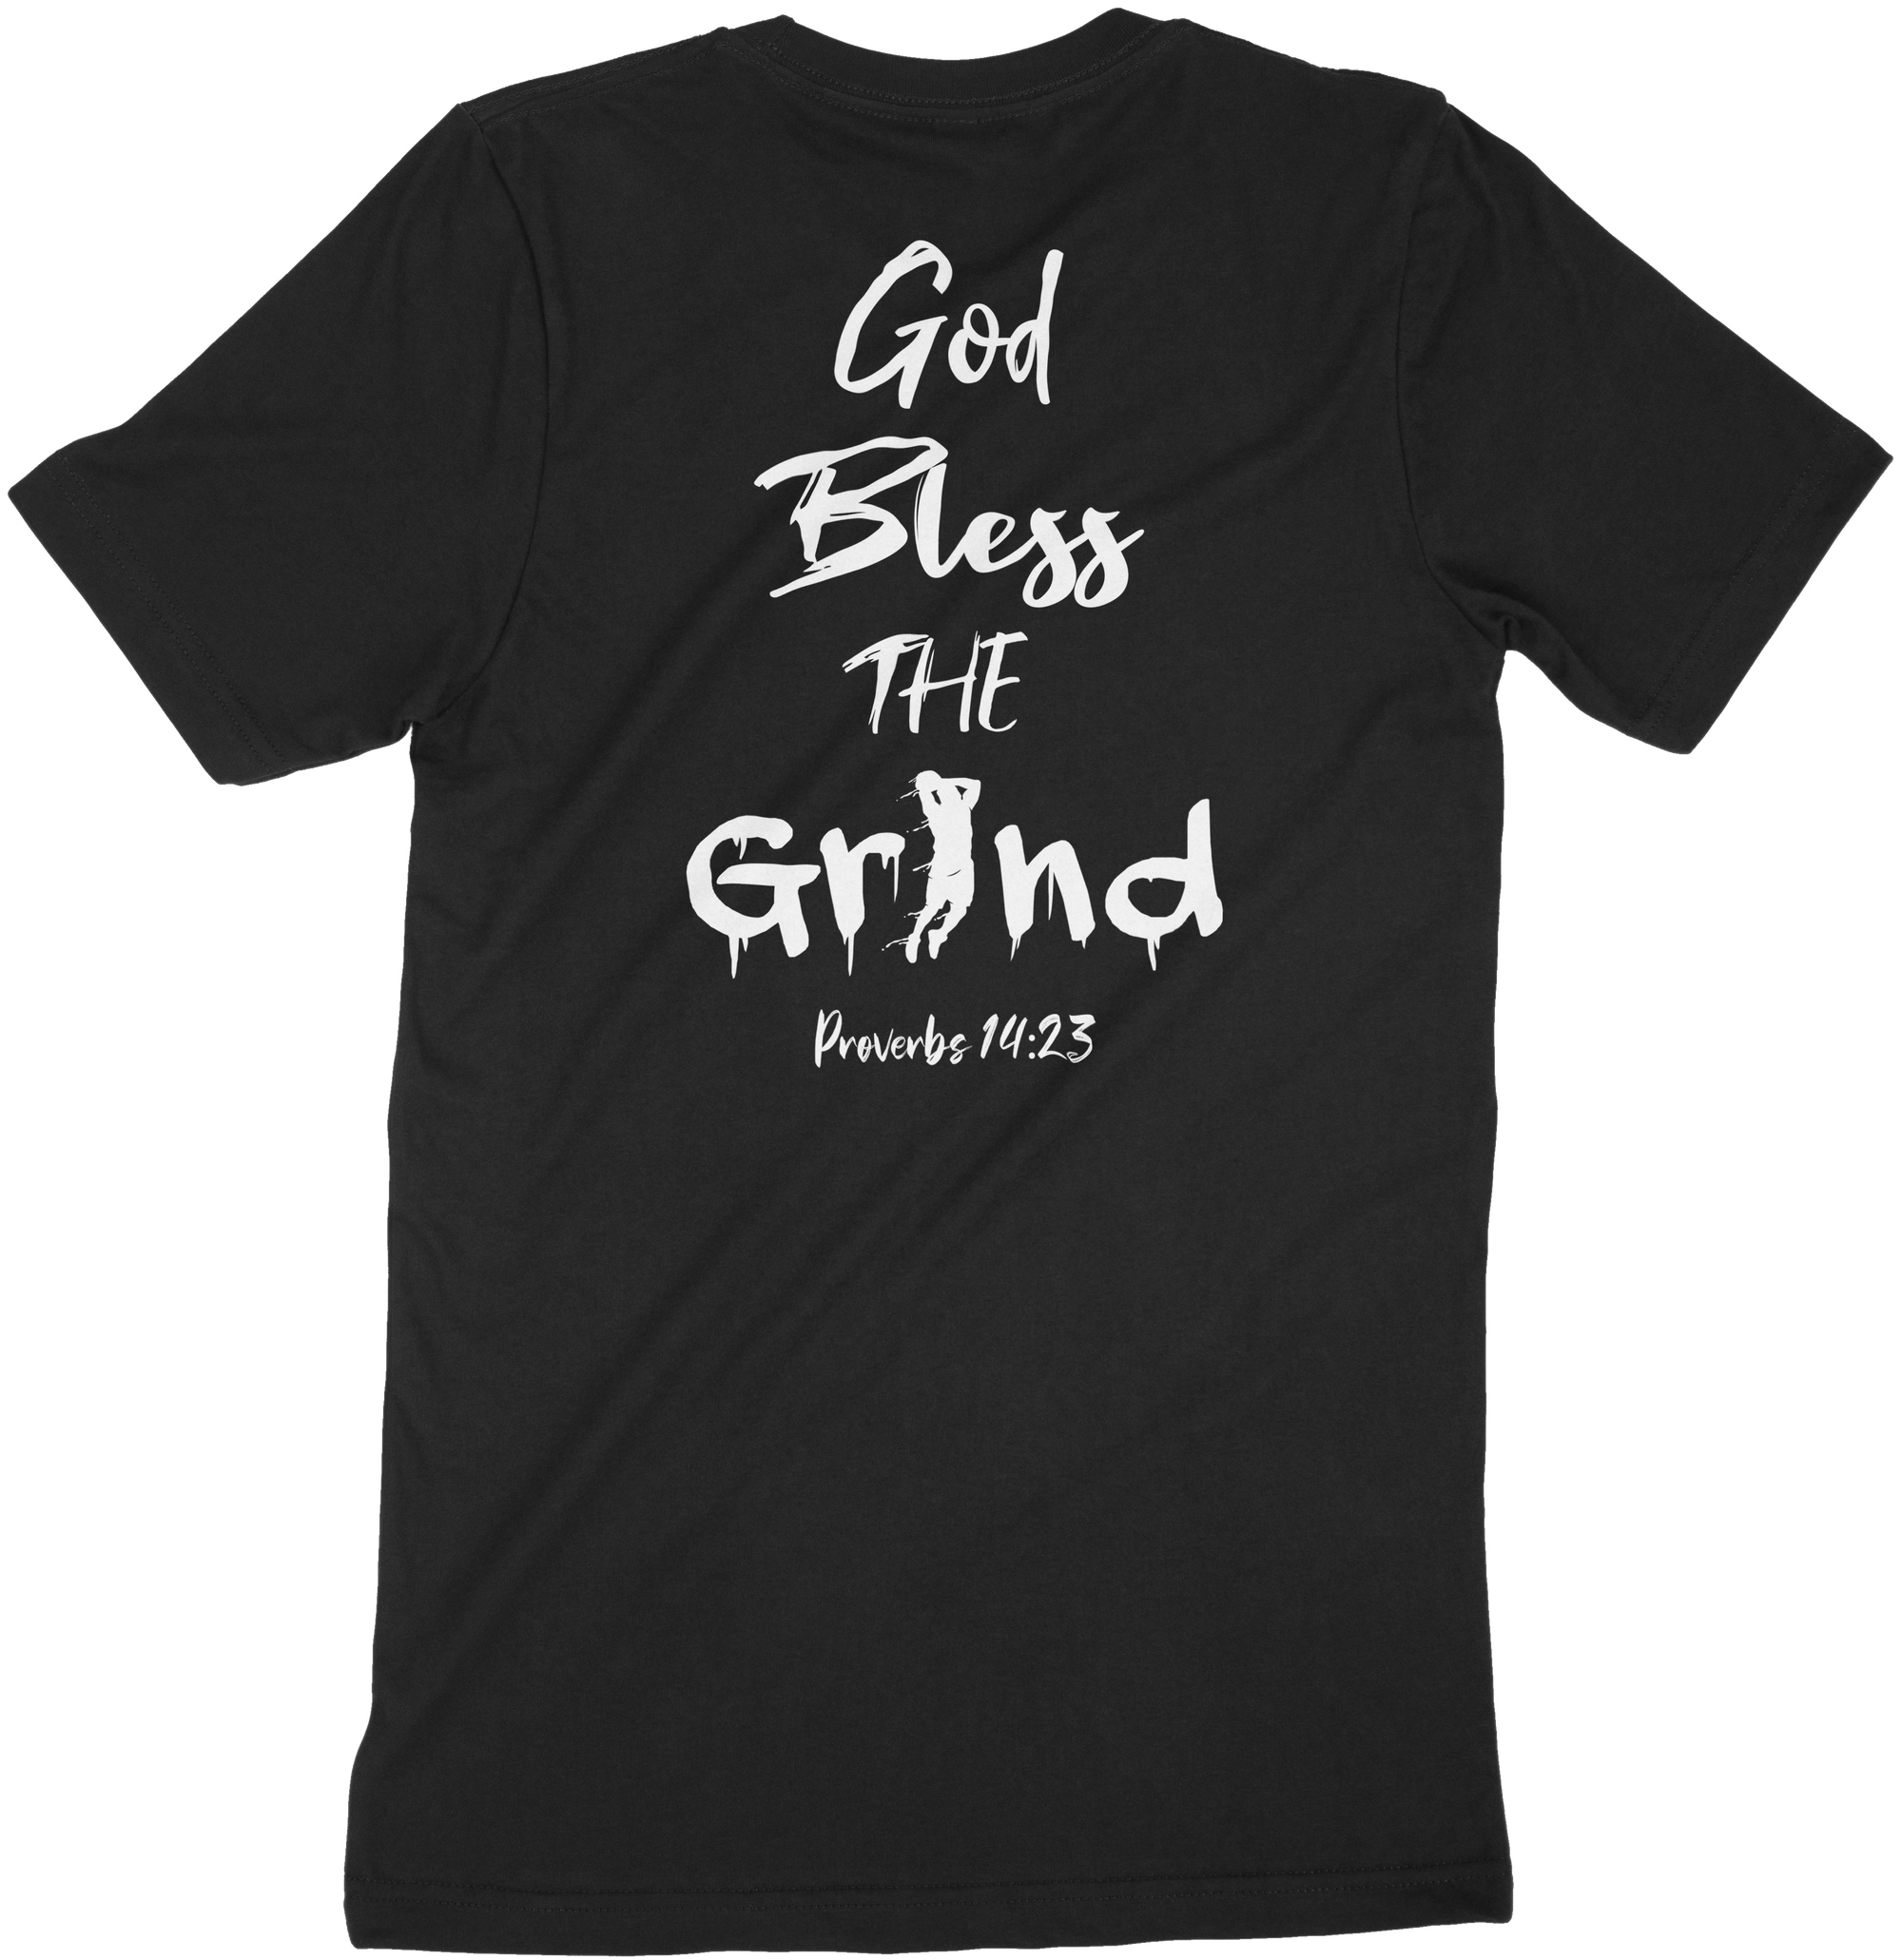 God Bless the Grind - Performance Tee